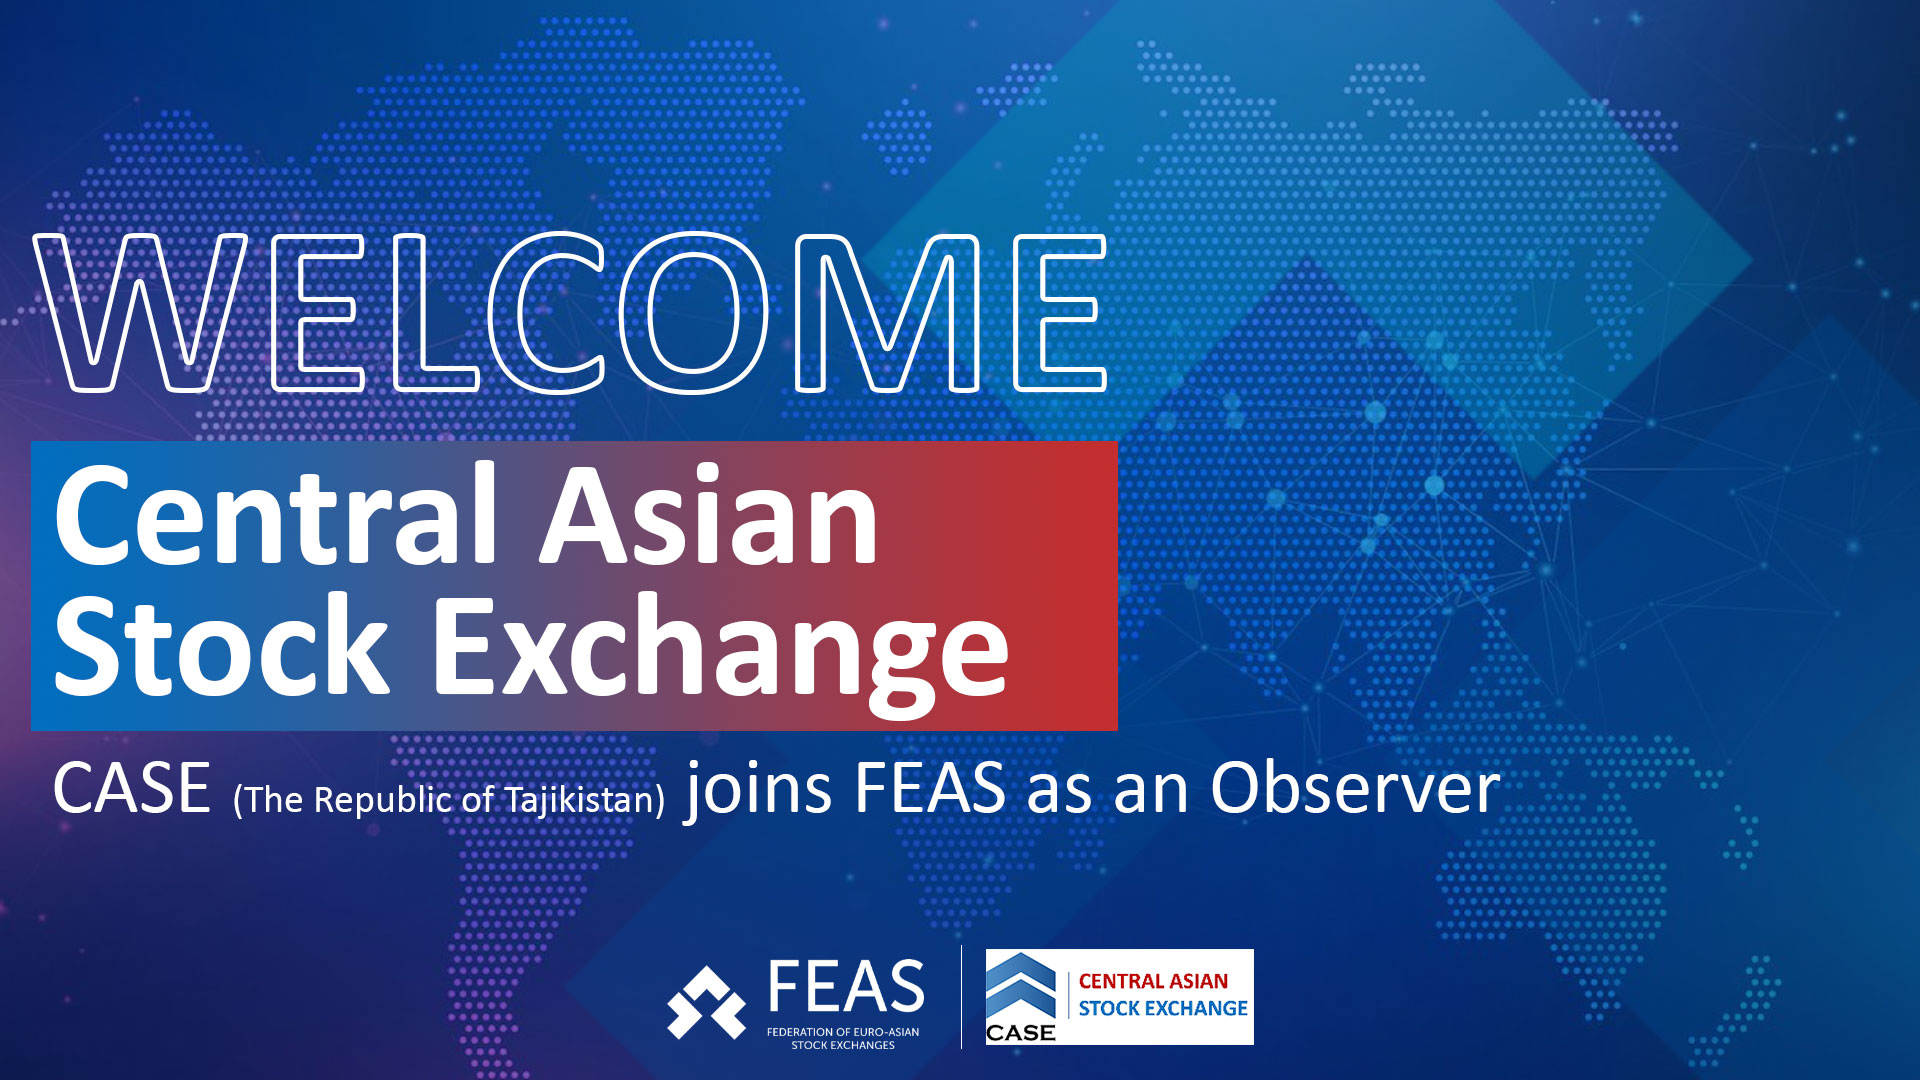 Central Asian Stock Exchange Joins FEAS as an Observer